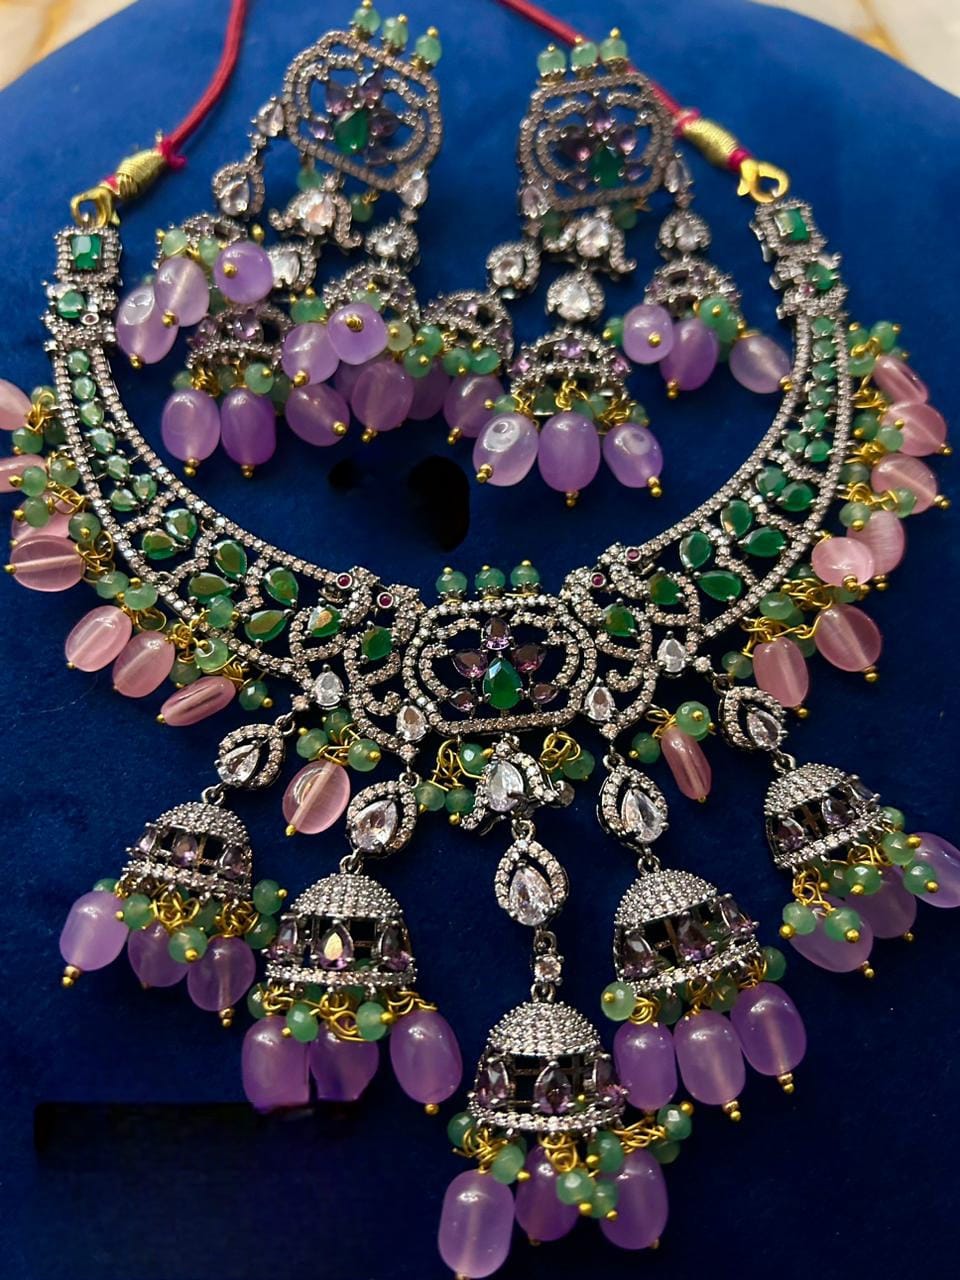 Super luxurious diamond replica Victorian set with screw back earrings with real pastel beads pink n purple unique combination